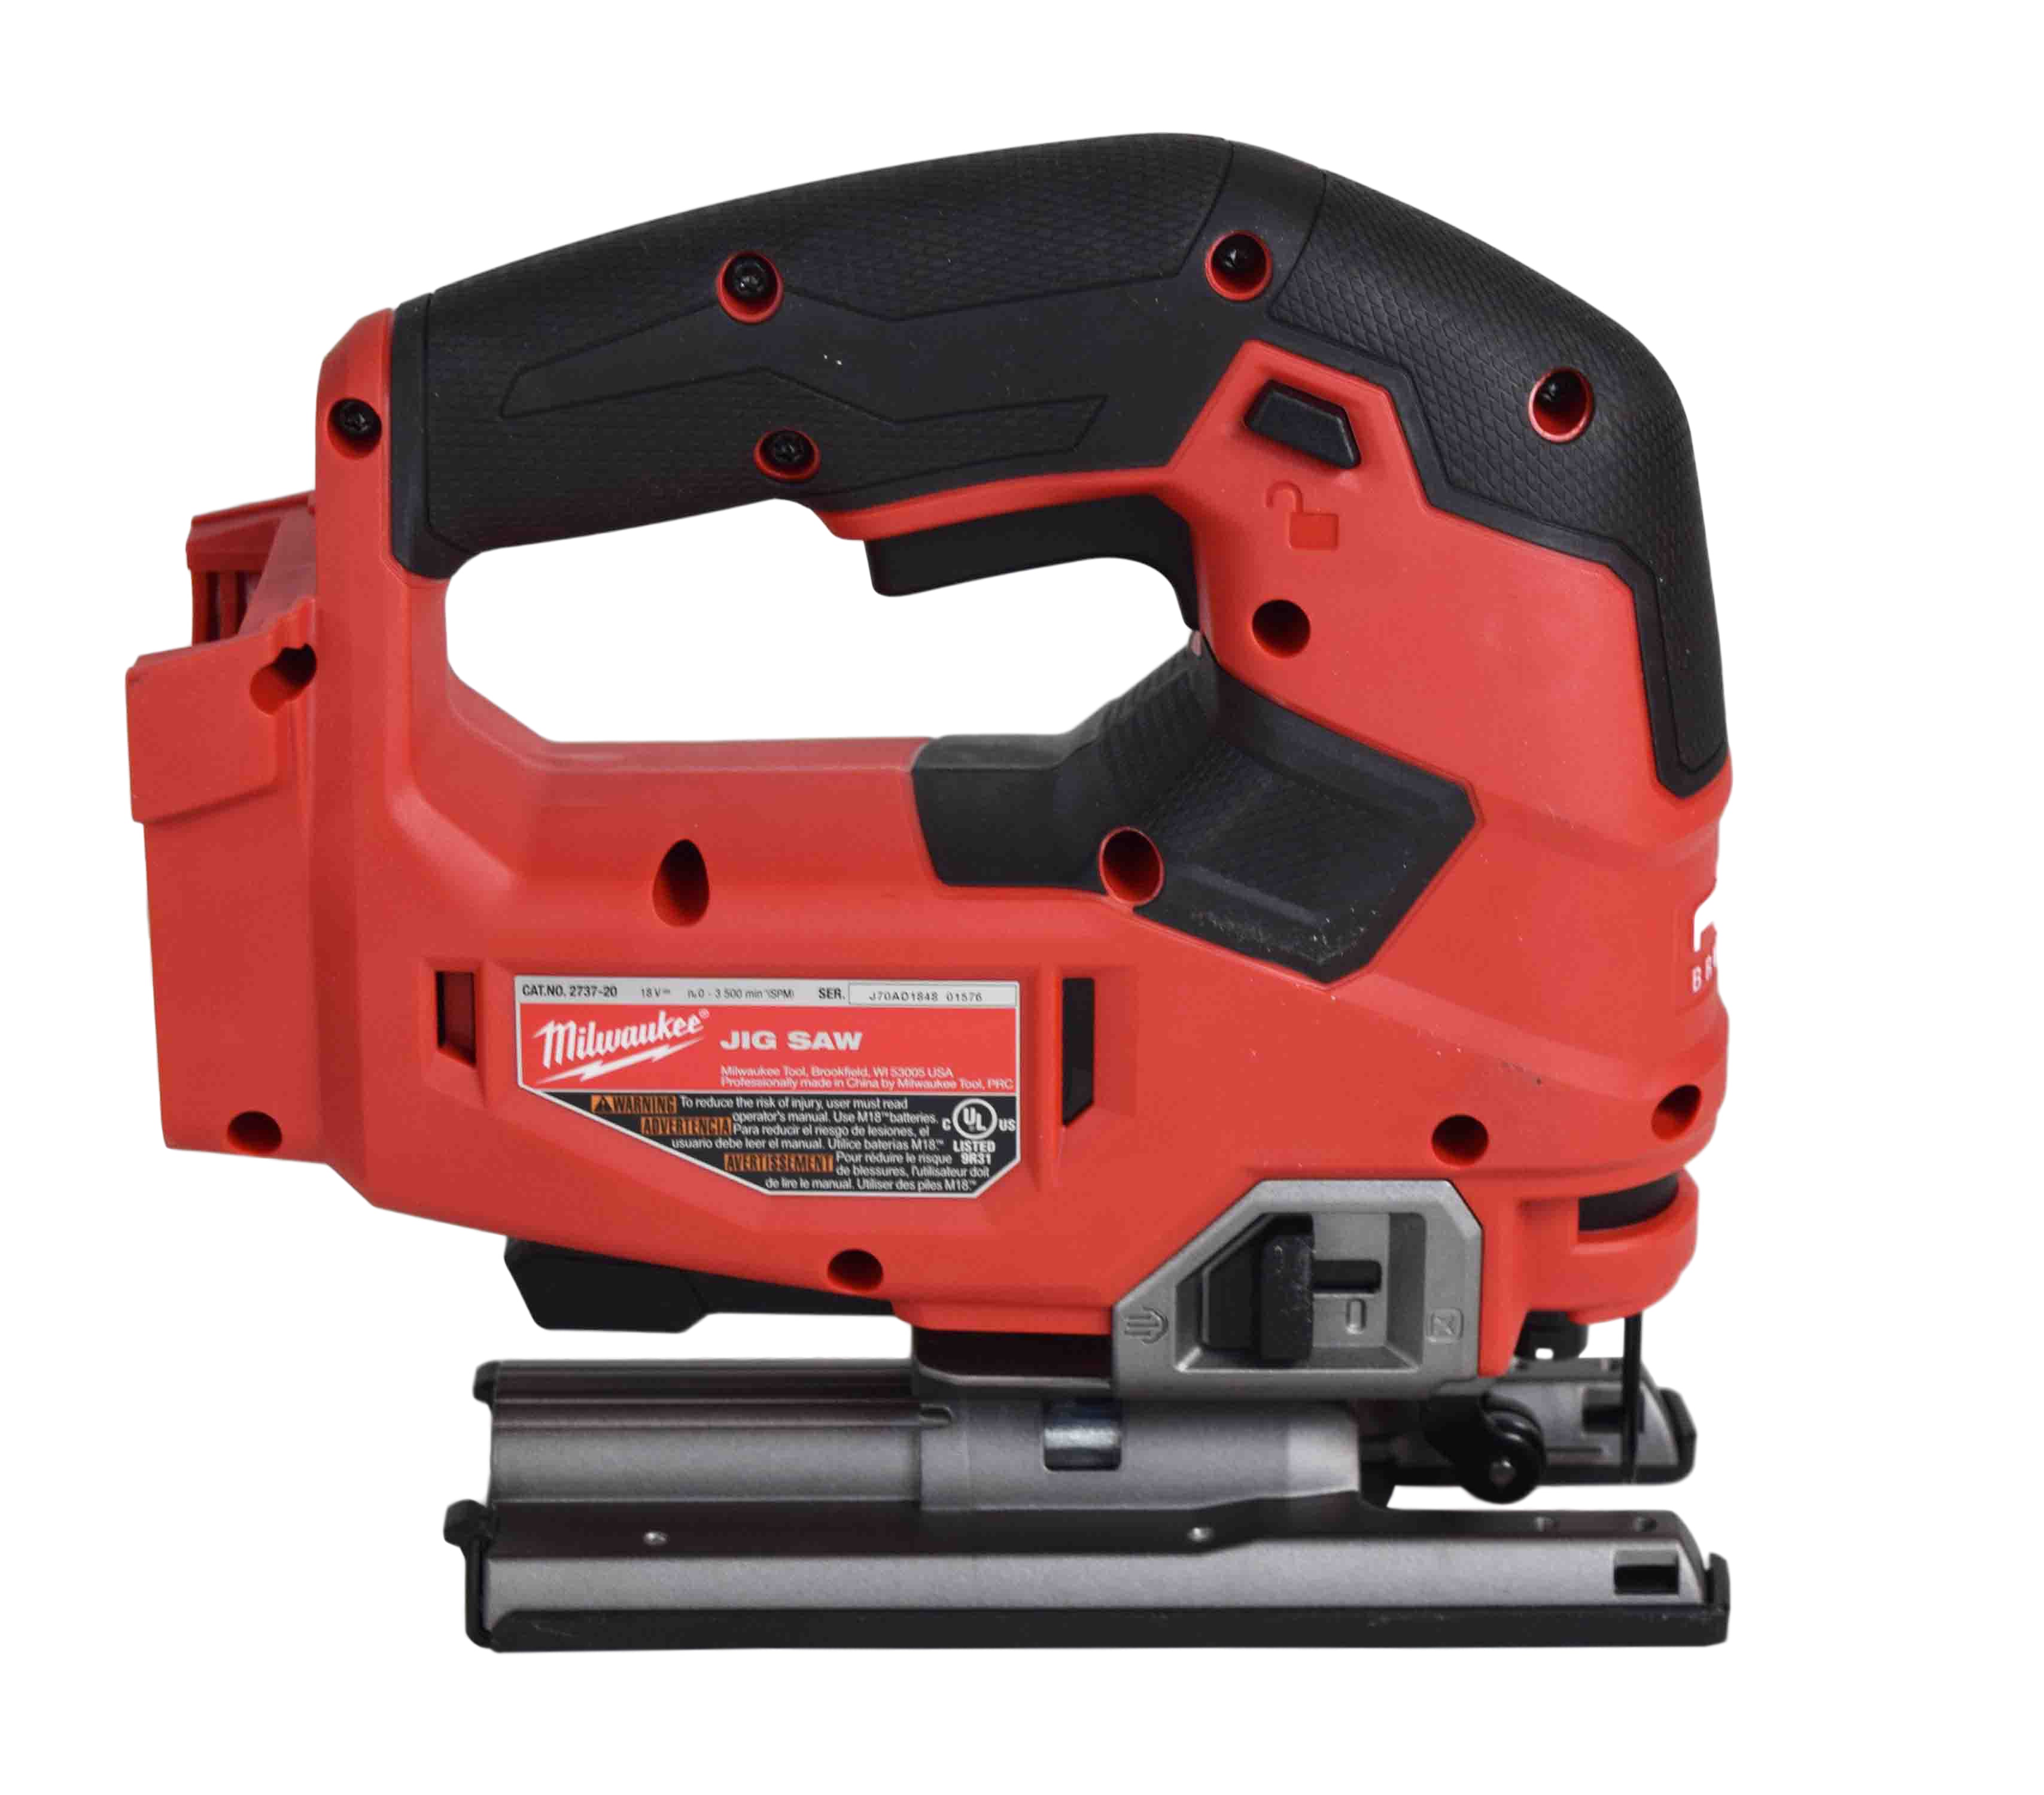 Milwaukee 2737-20 M18 FUEL 18-Volt Lithium-Ion Brushless Cordless Jig Saw (Tool-Only)